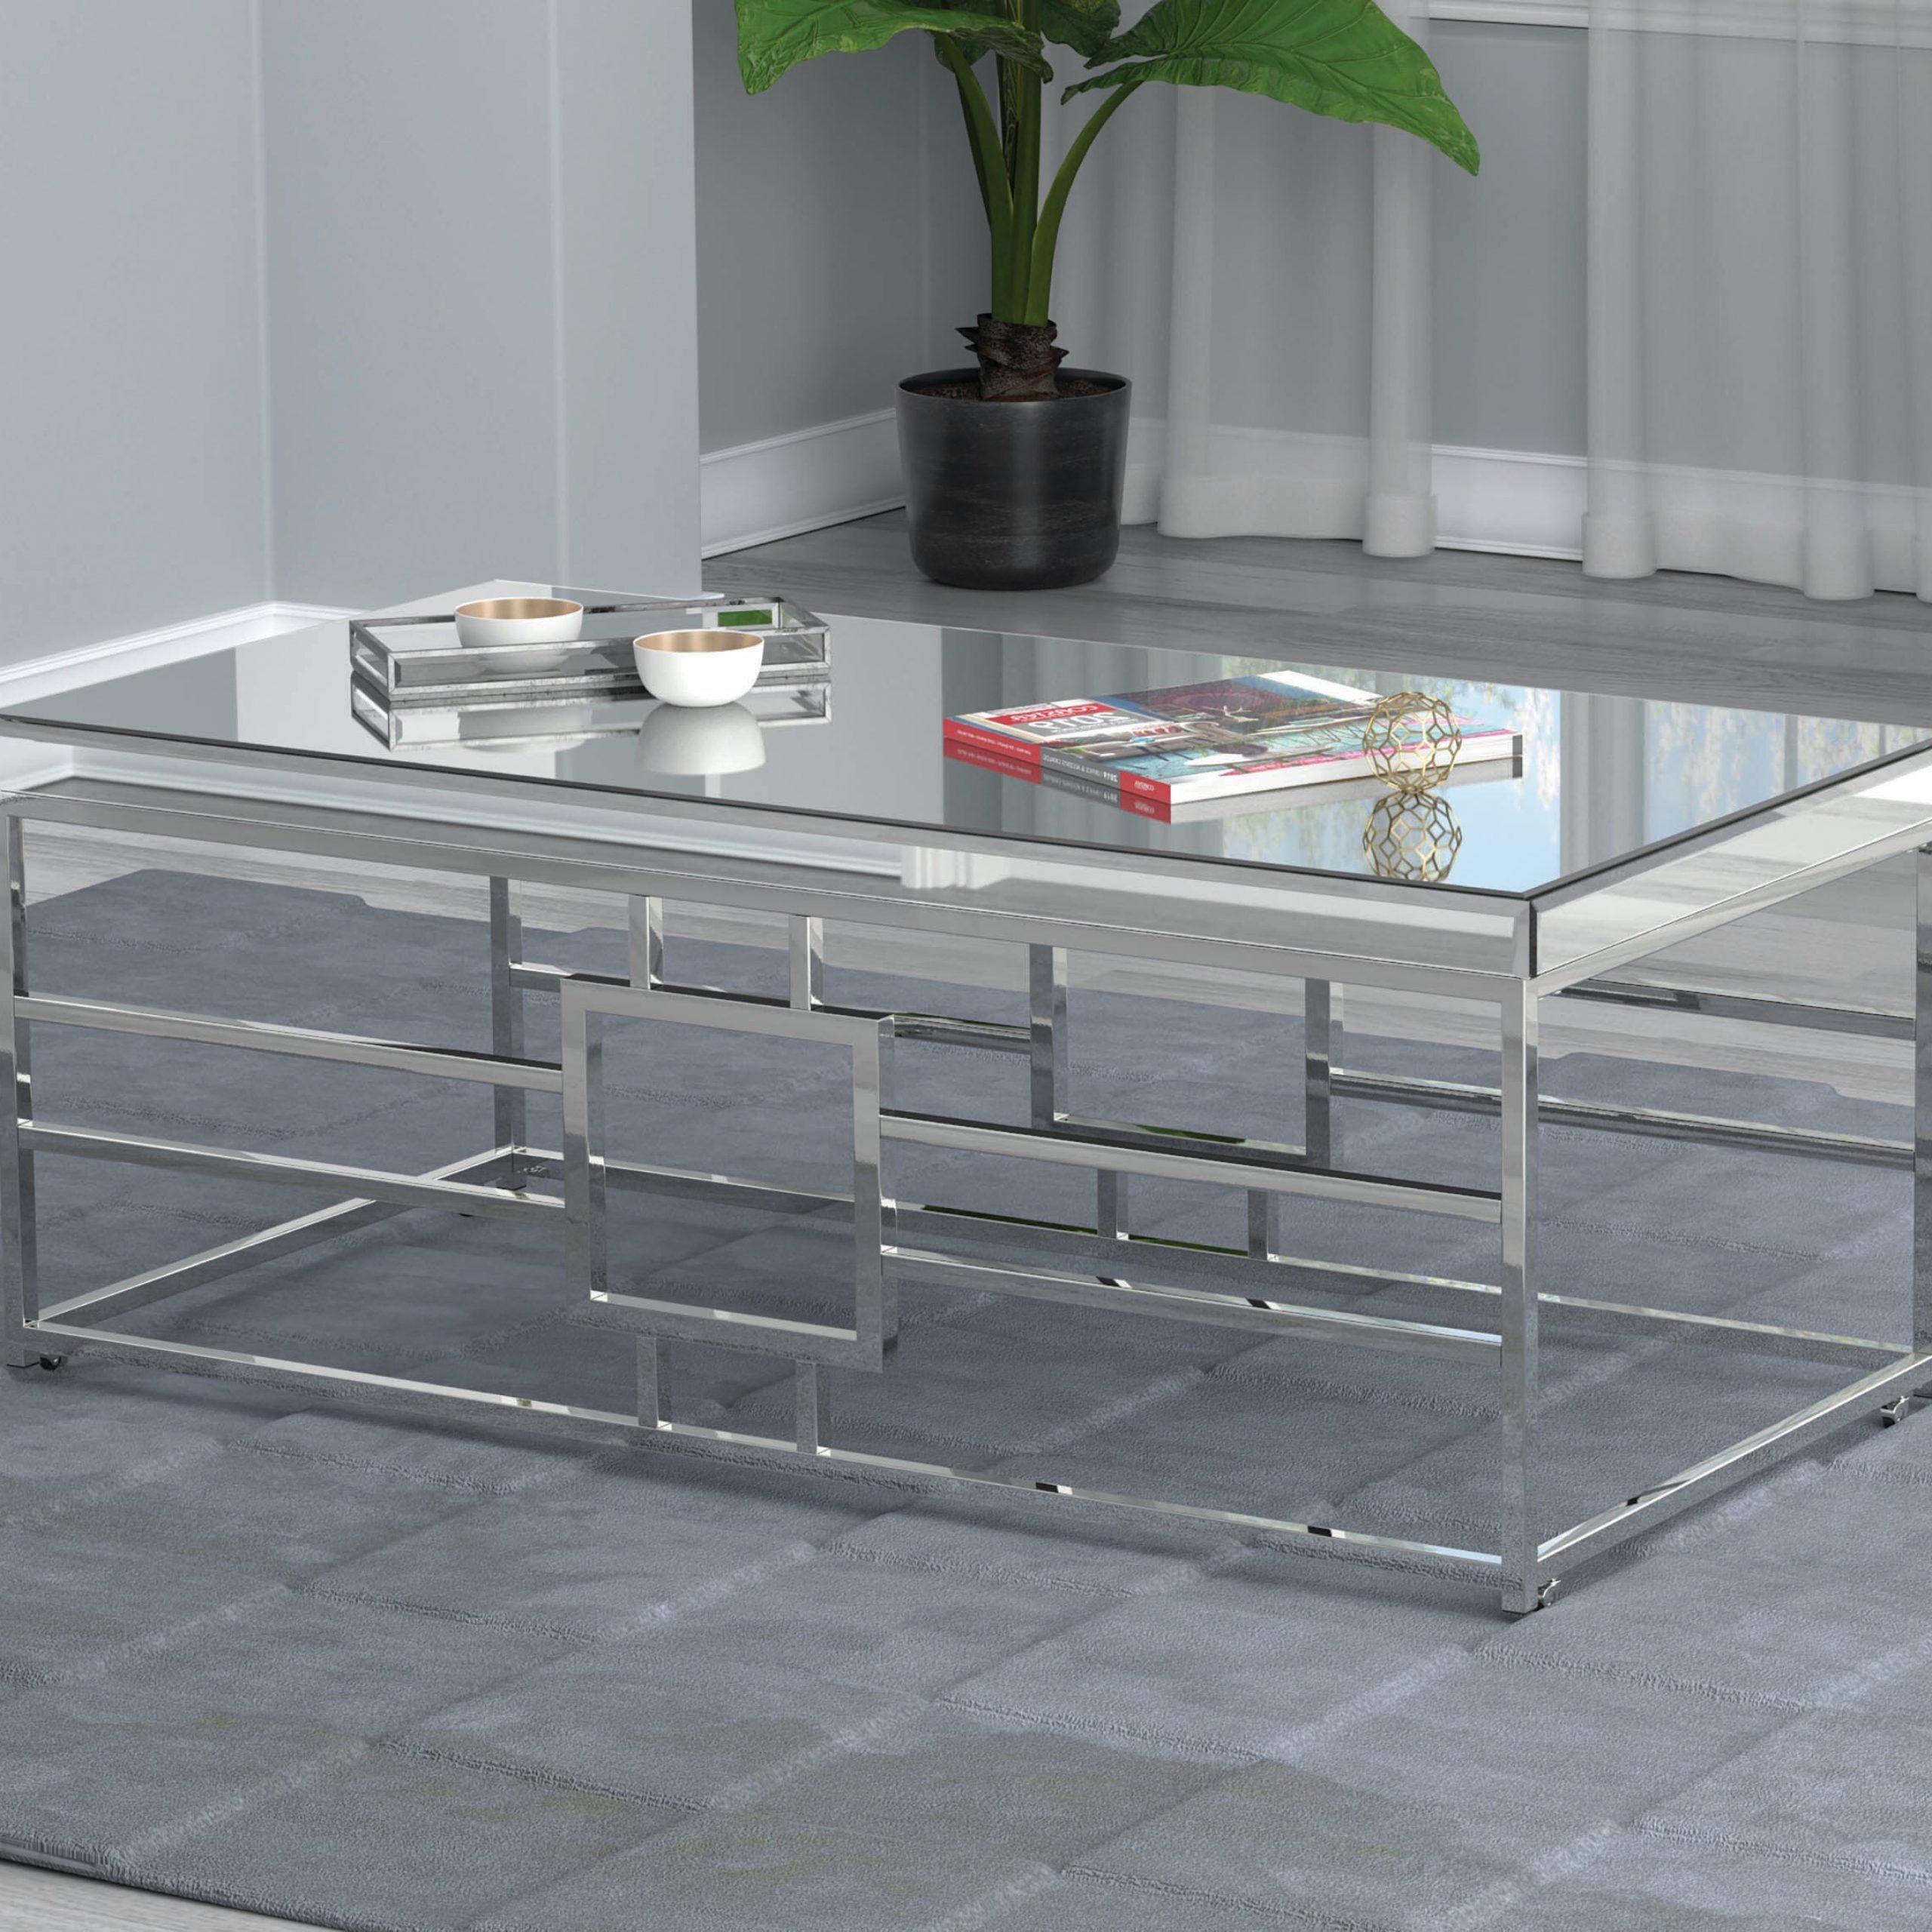 Orren Ellis Rectangular Coffee Table With Casters Mirror And Chrome |  Wayfair Within Chrome Coffee Tables (View 19 of 20)